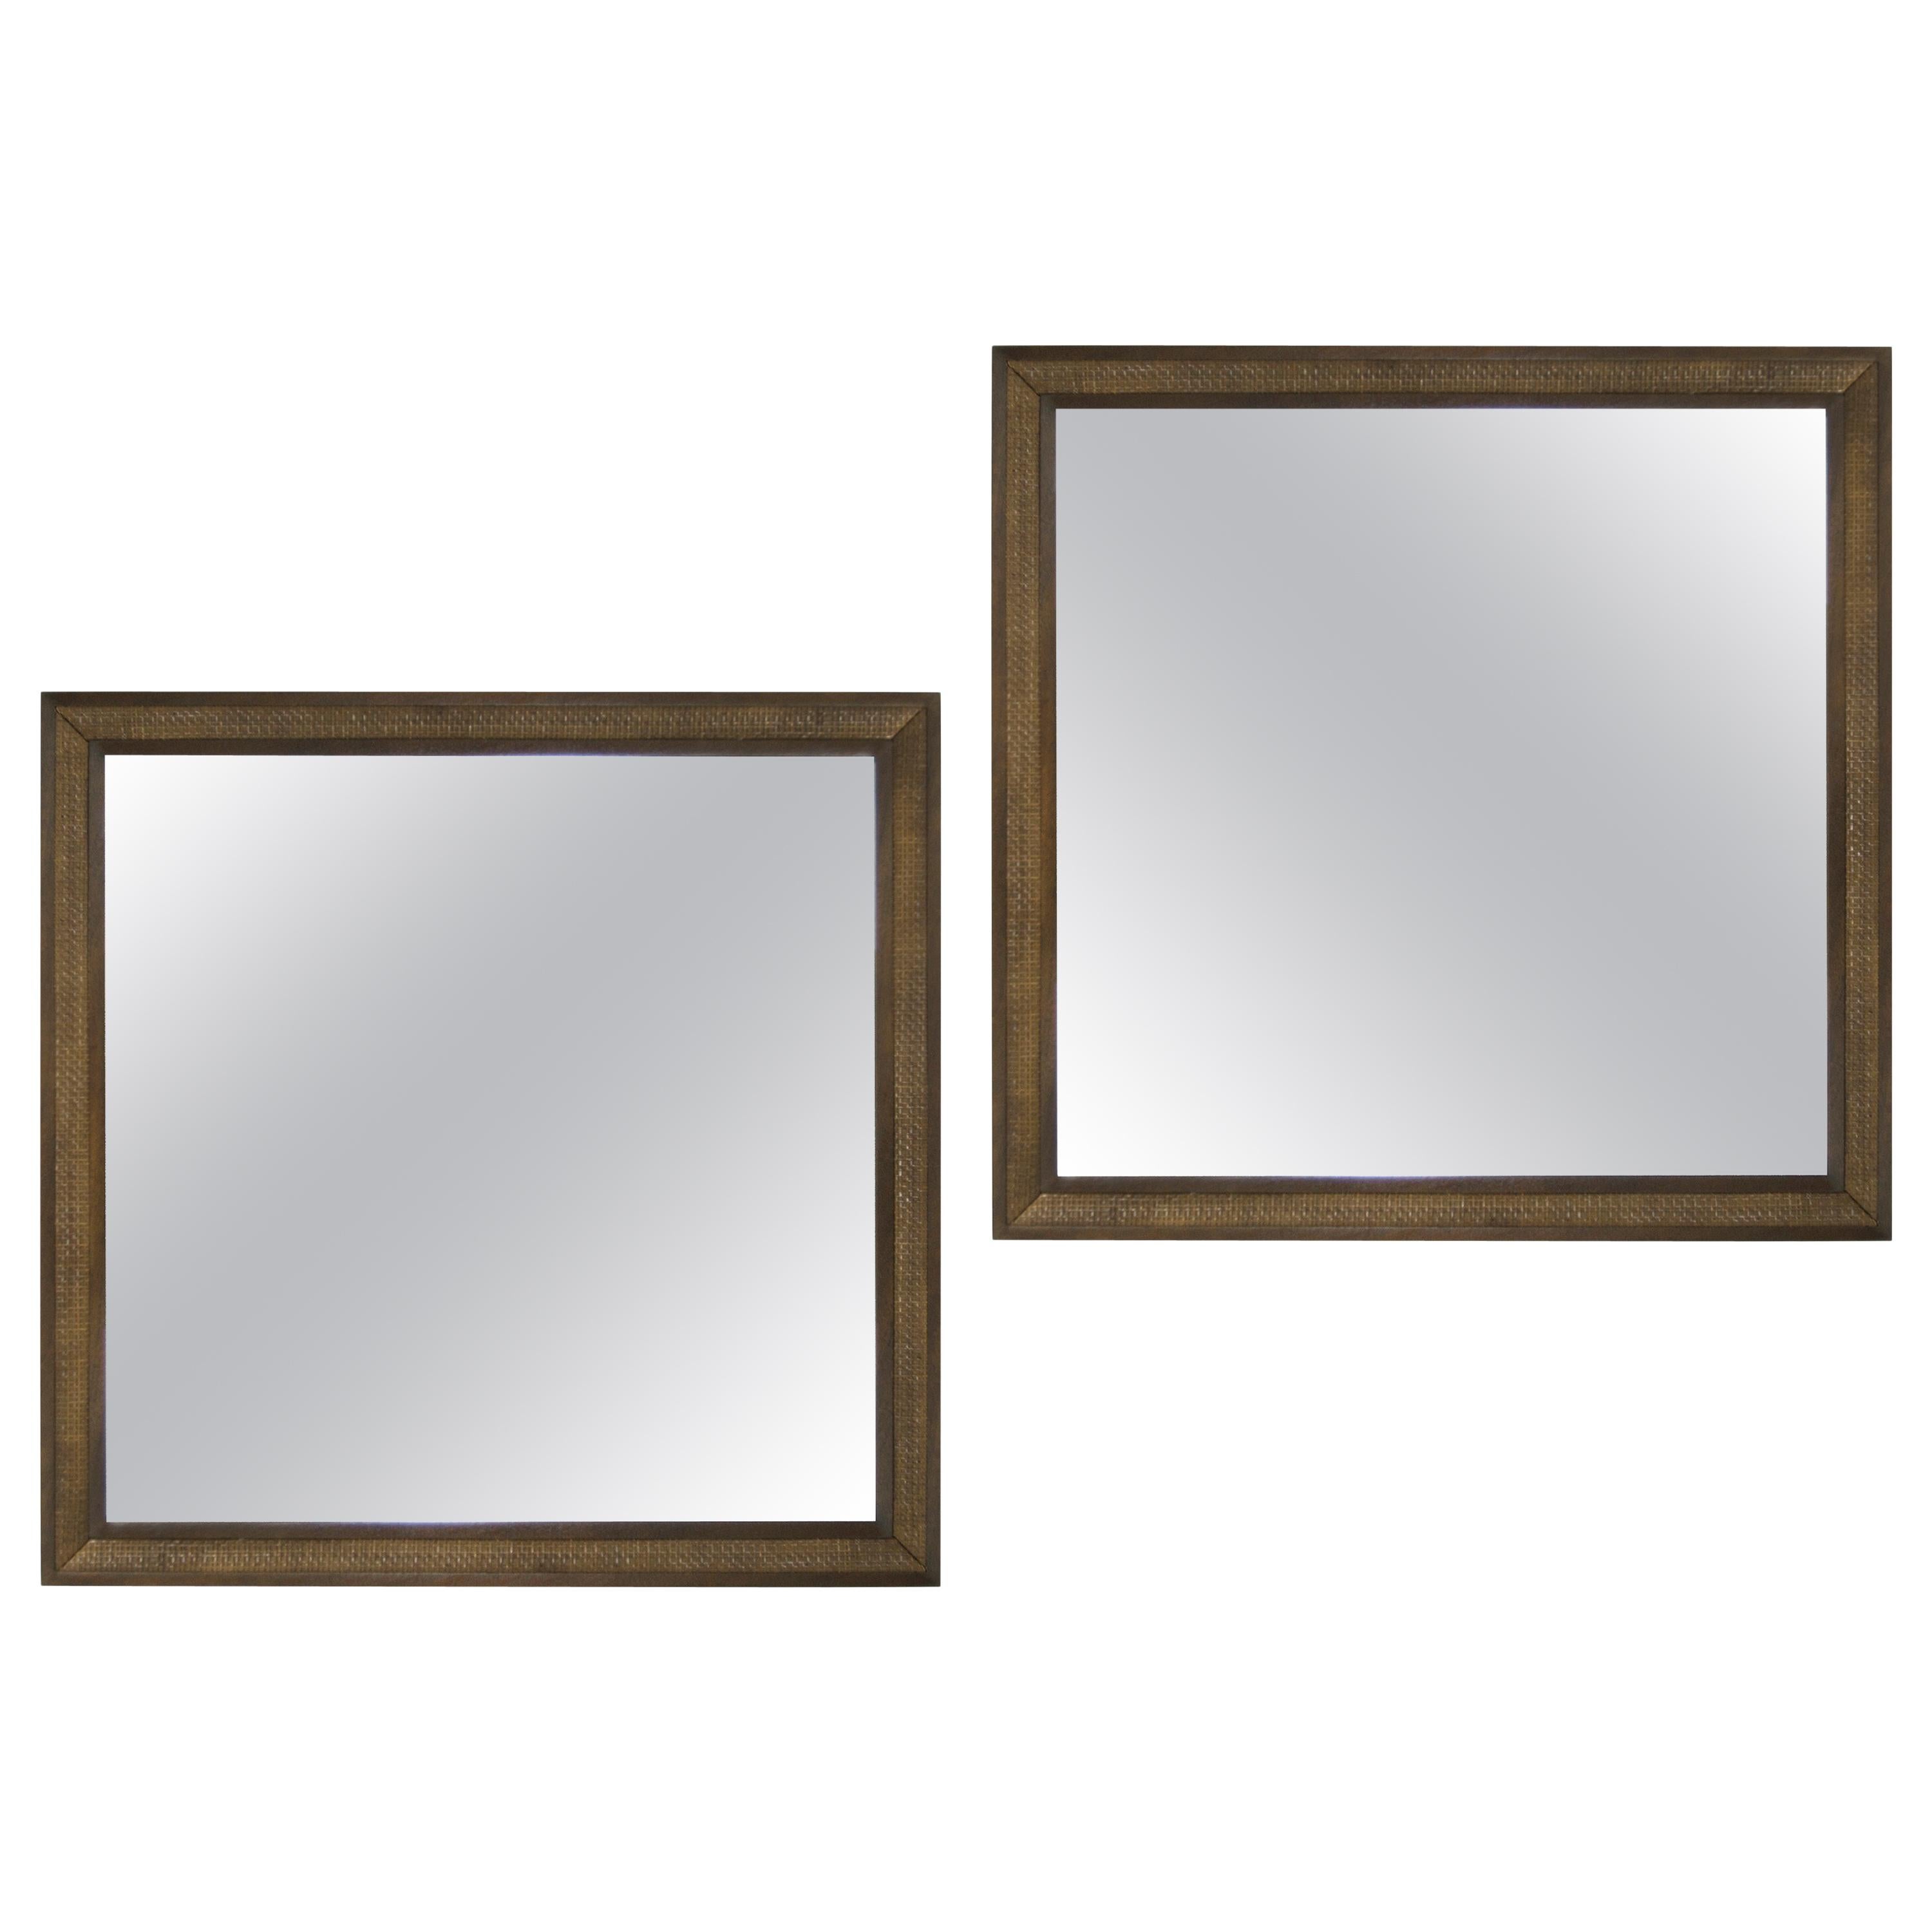 Set of Matching Mirrors by Edward Wormley for Dunbar, 1950s For Sale